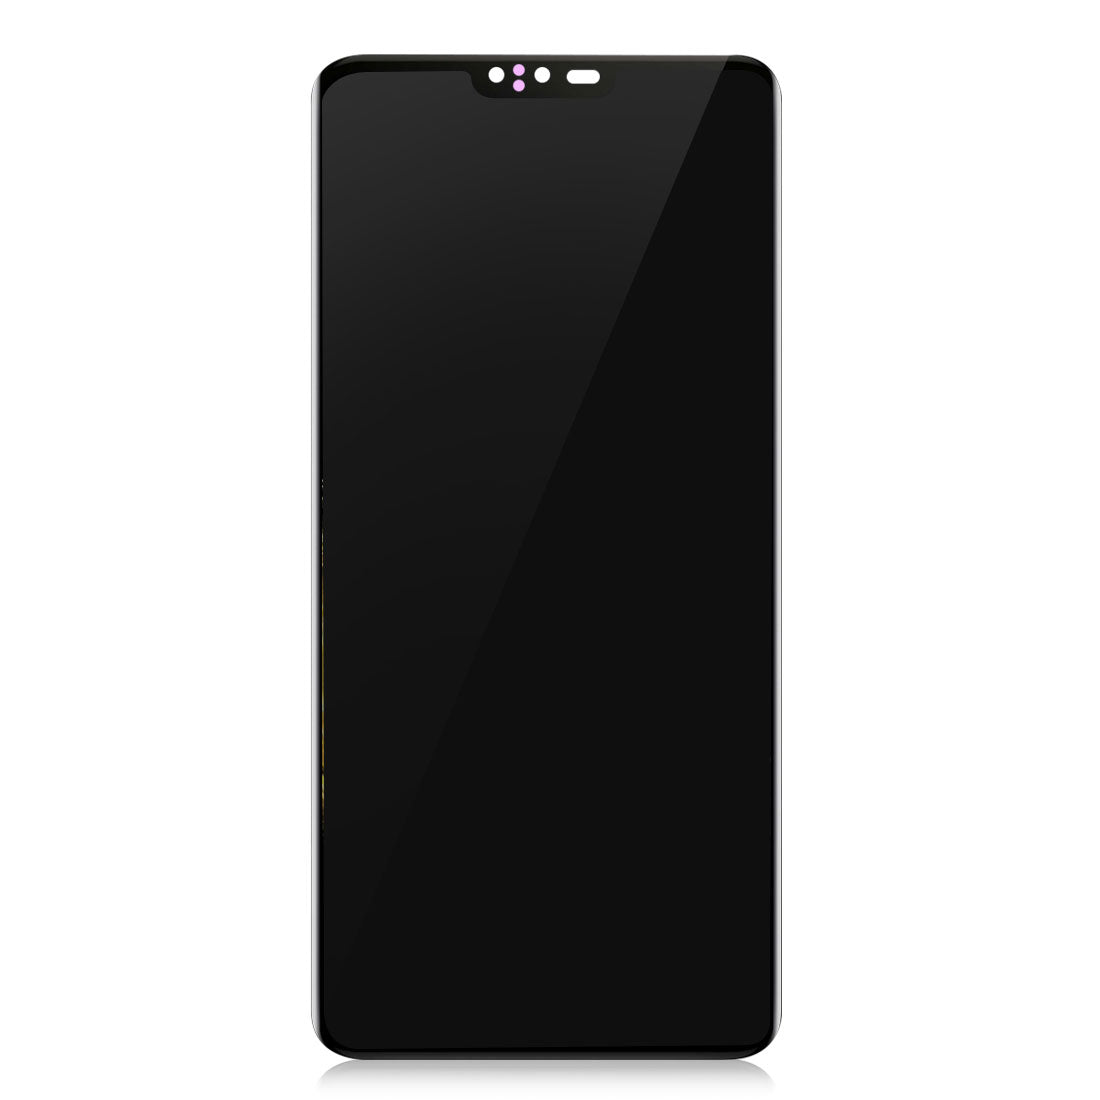 OEM Screen Replacement for LG V50 ThinQ 5G